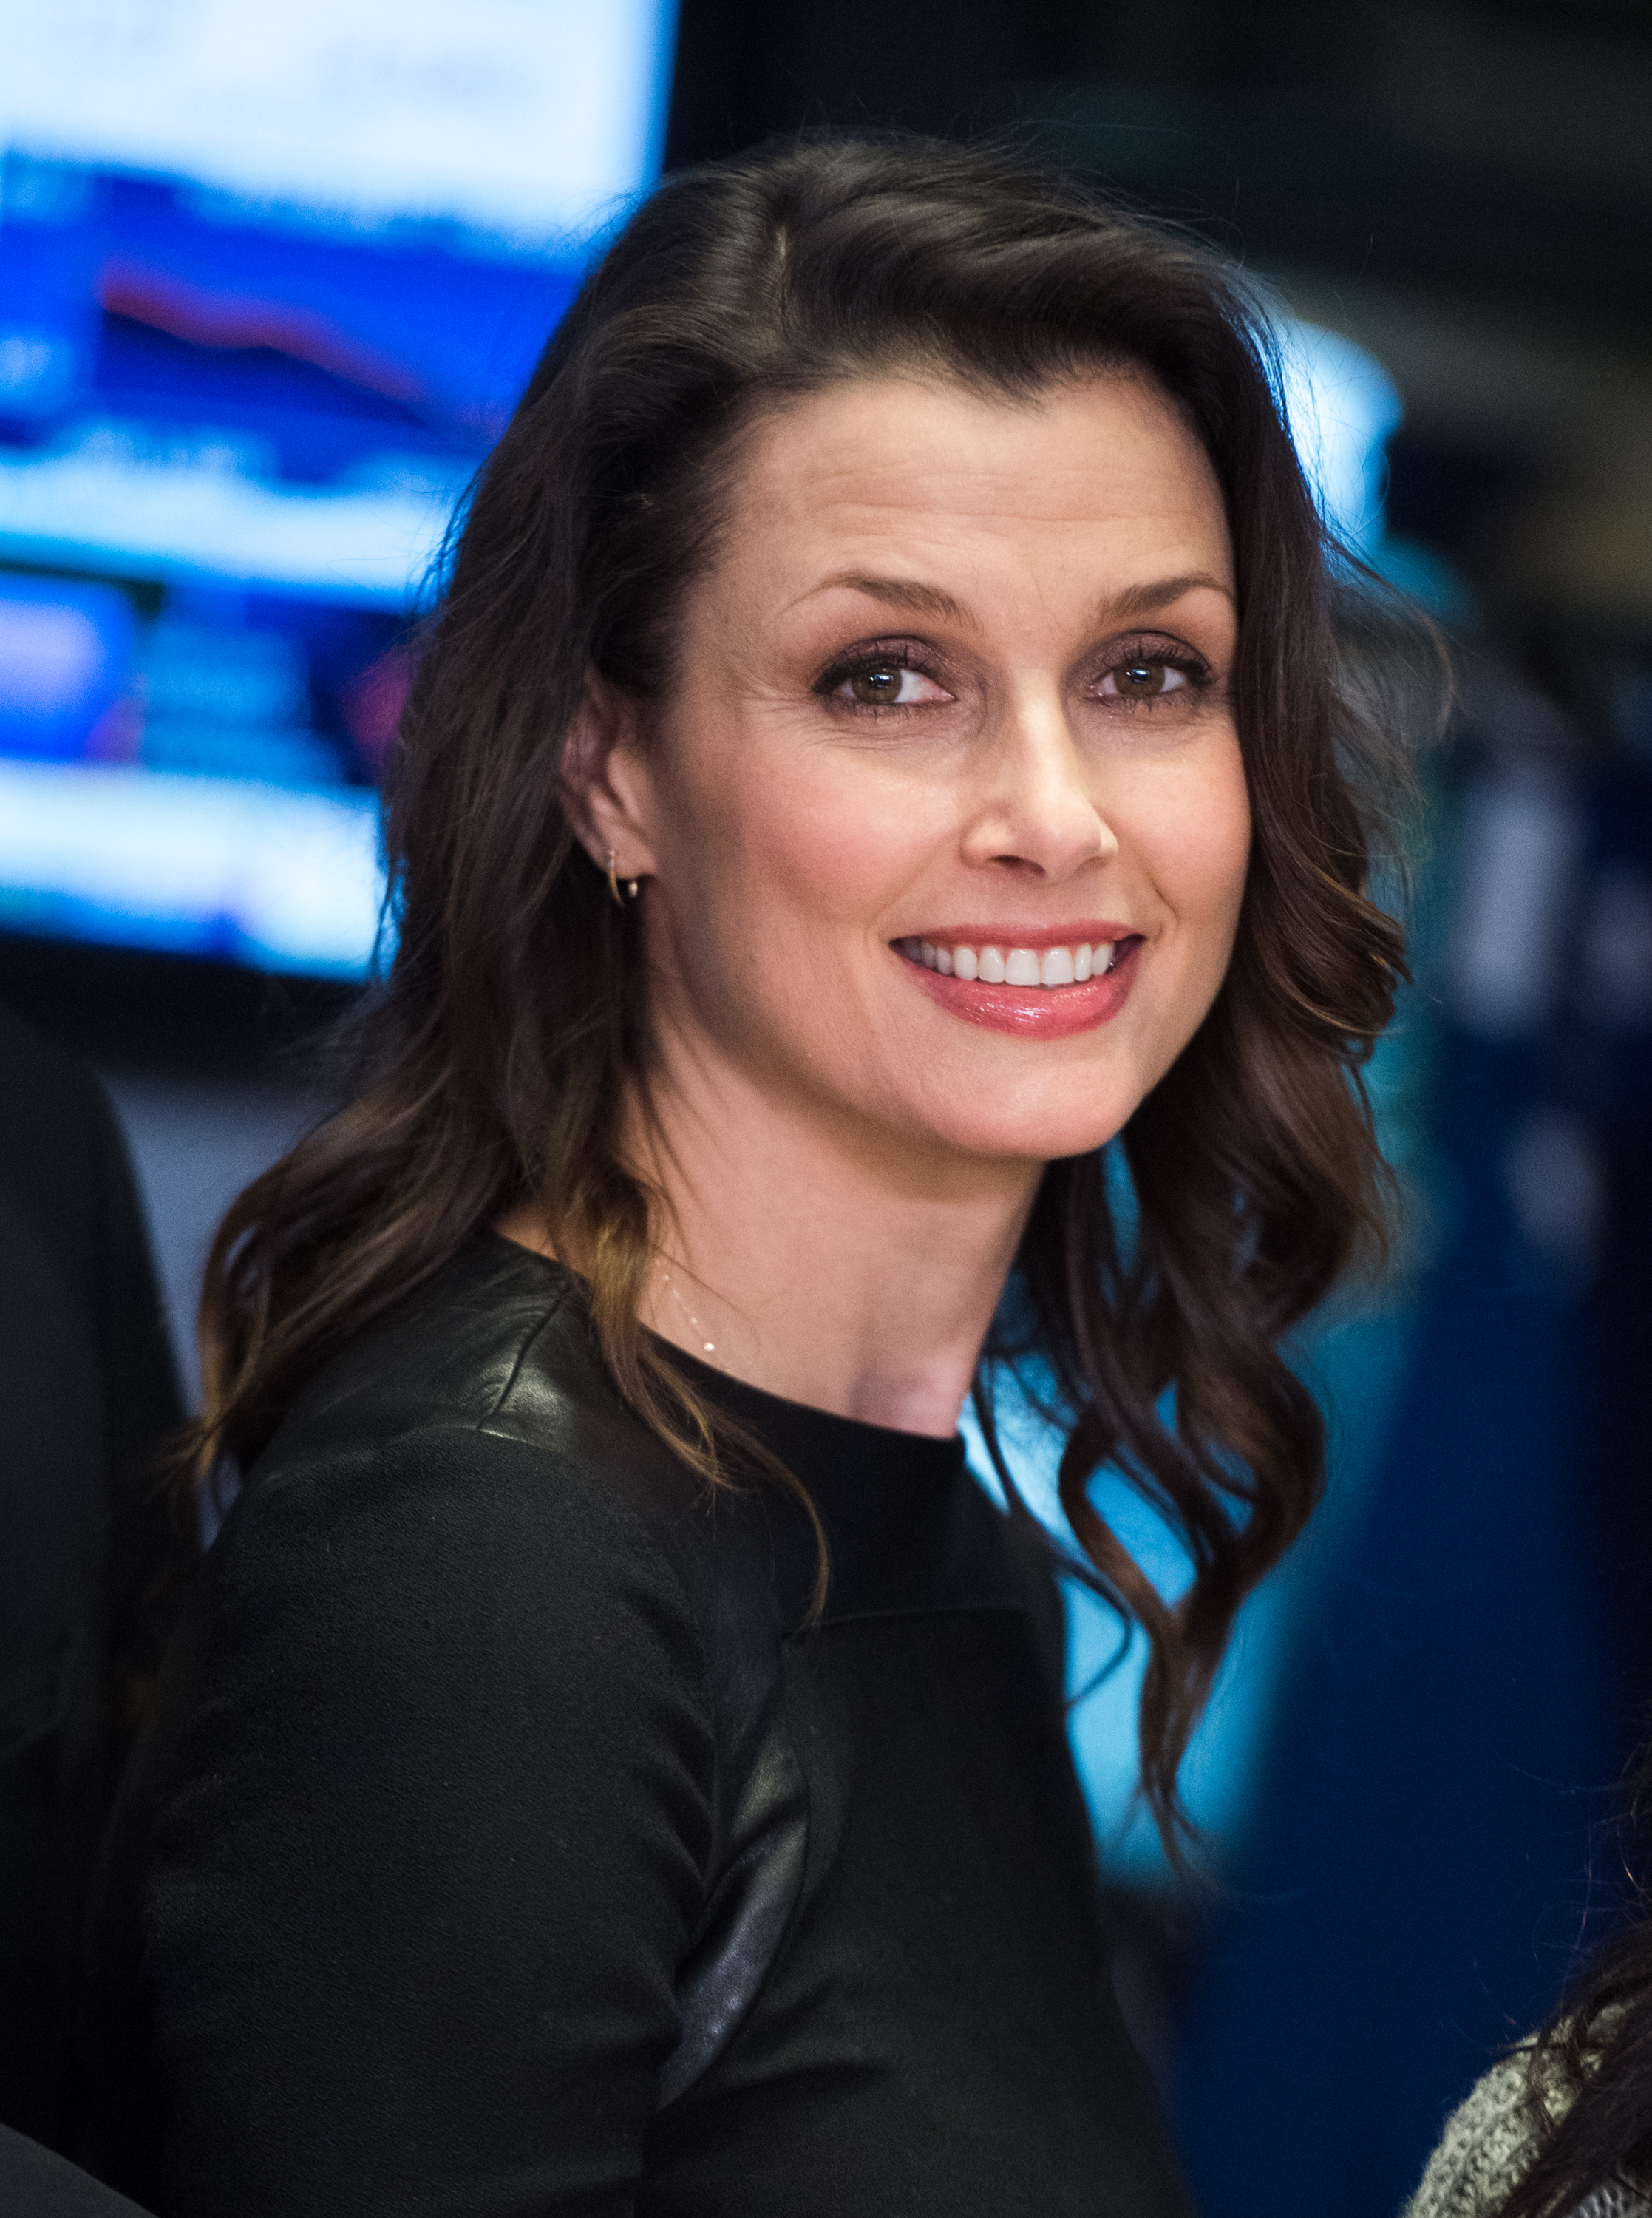 Bridget Moynahan attends the New York Stock Exchange closing bell at New York Stock Exchange on January 25, 2016 in New York City | Source: Getty Images